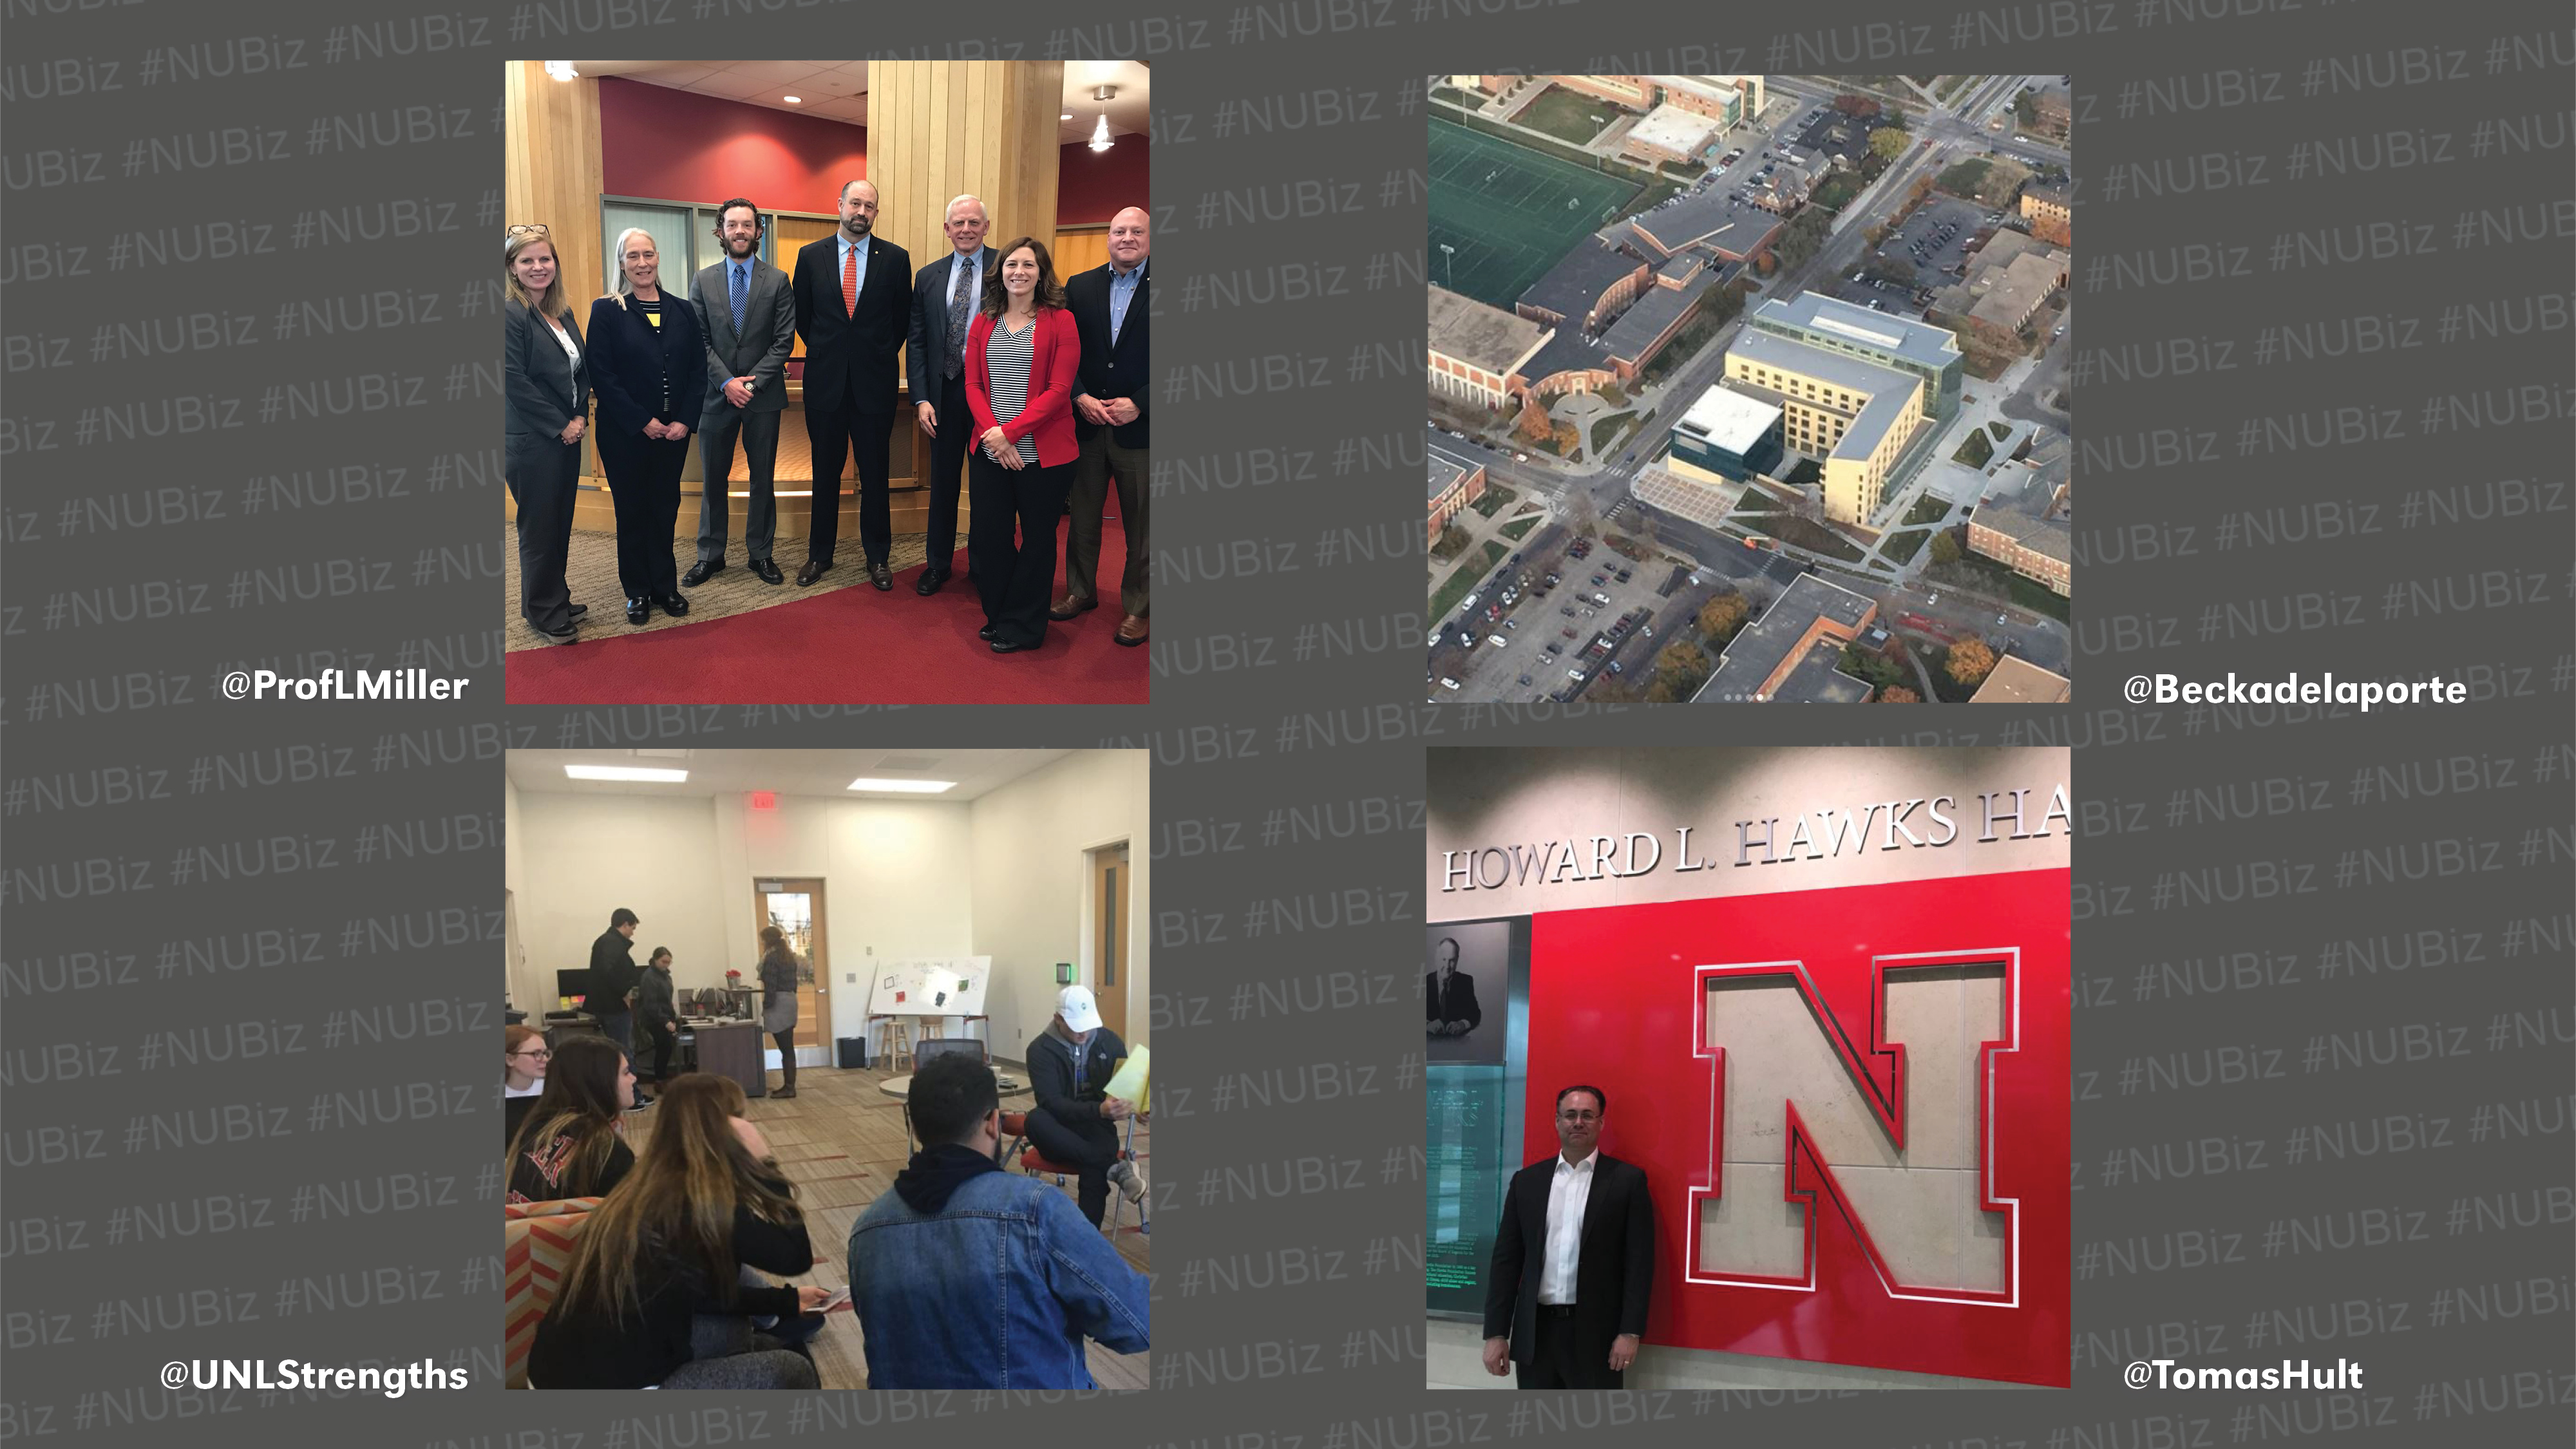 Tag your photos on Instagram and Twitter with #NUBiz to be featured next week. 